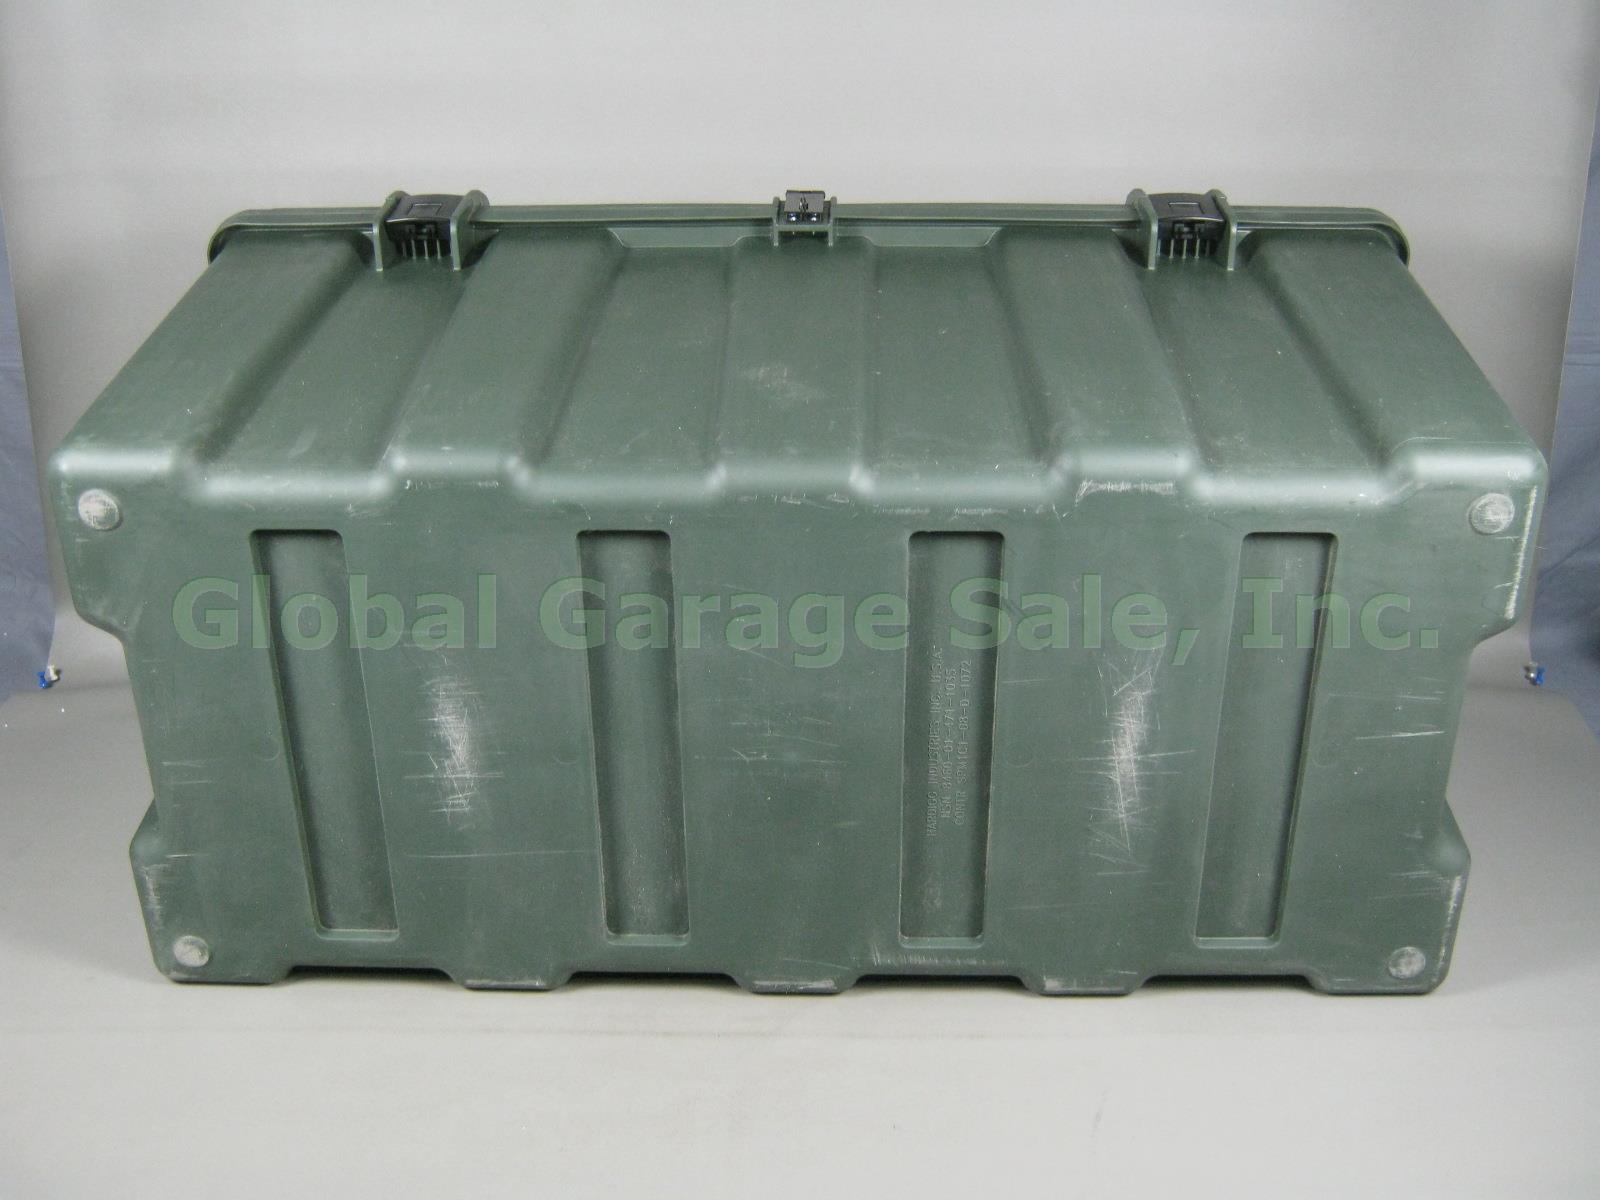 NEW Pelican Hardigg TL 500i US Army Military Foot Locker Trunk With 2 Trays NR! 6